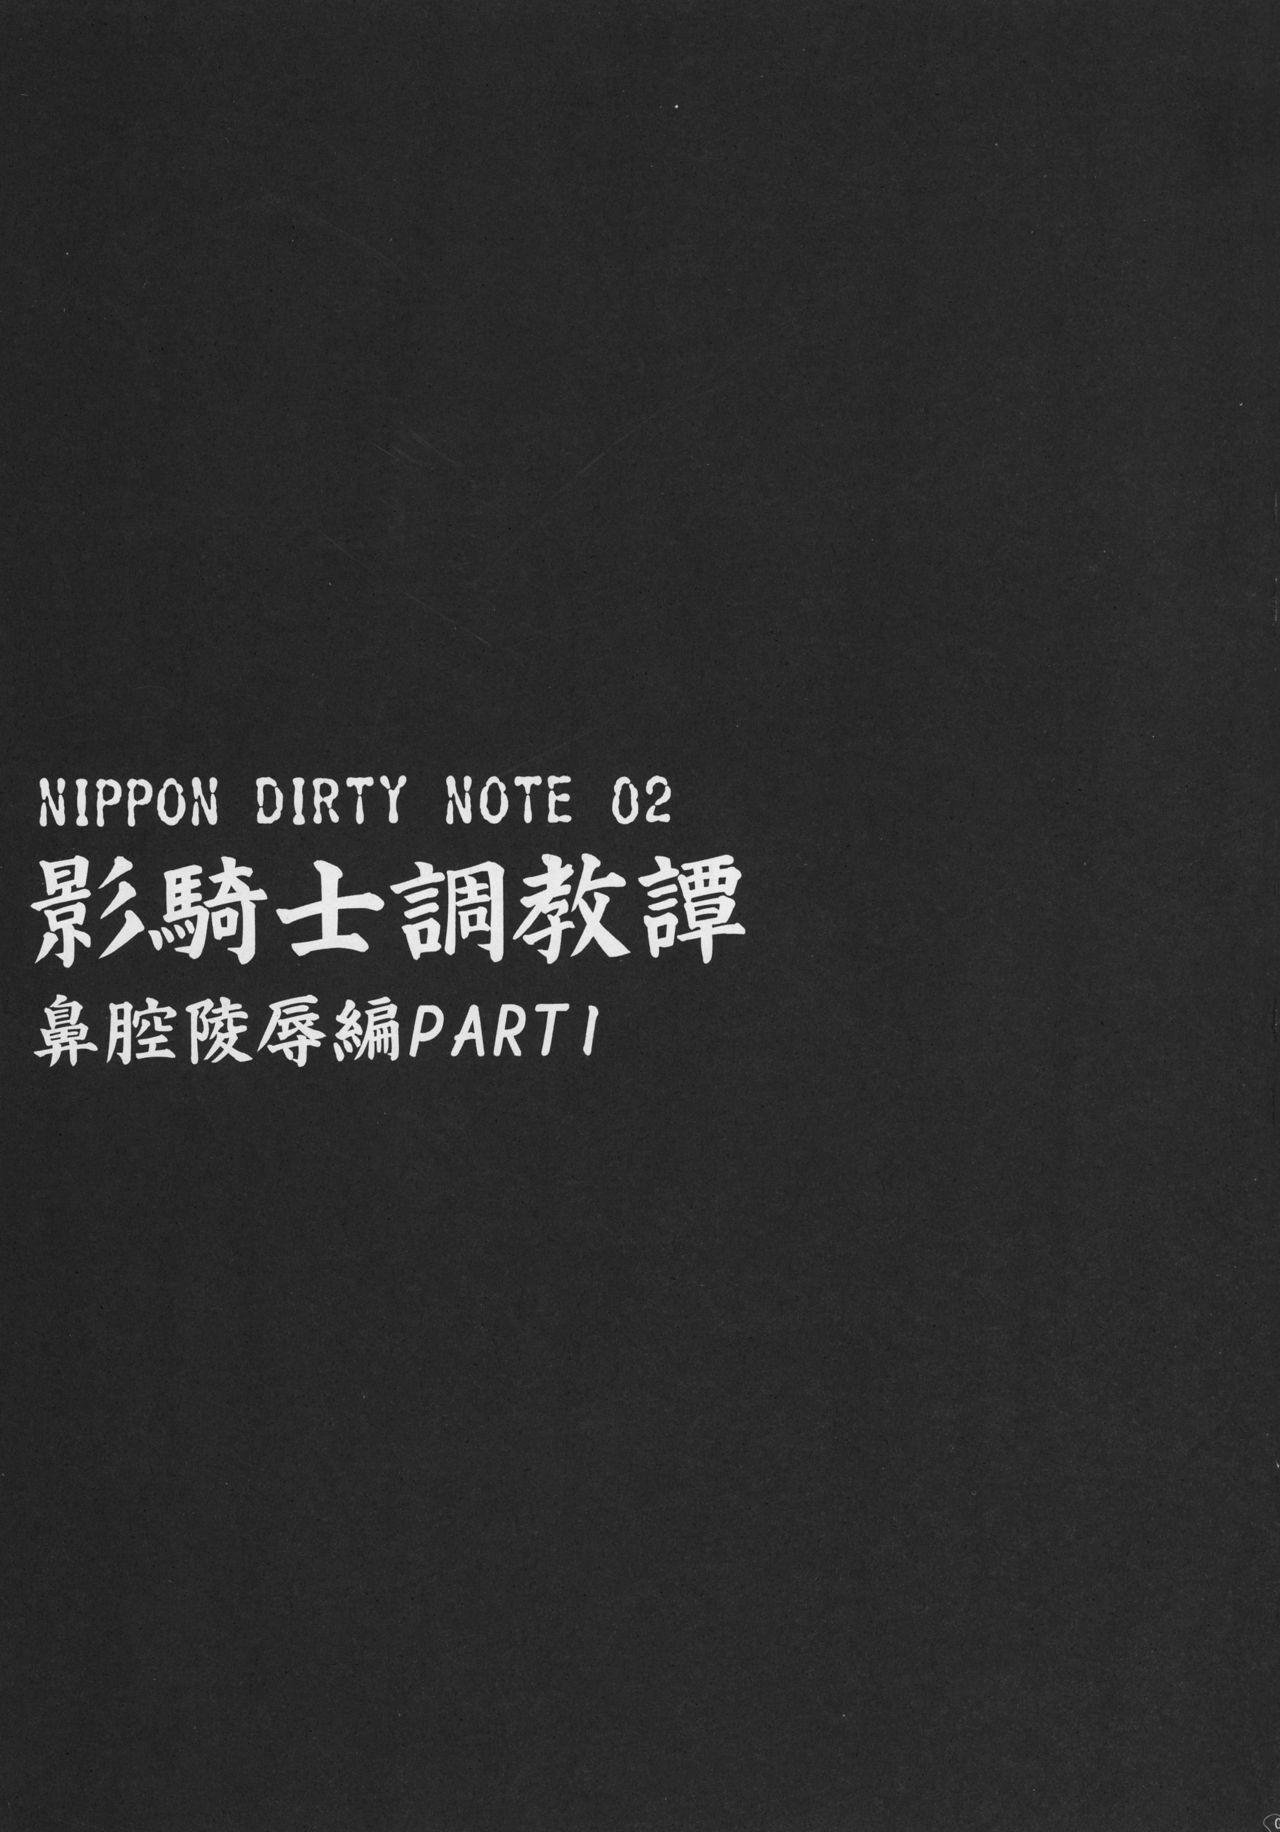 NIPPON DIRTY NOTE 02 8